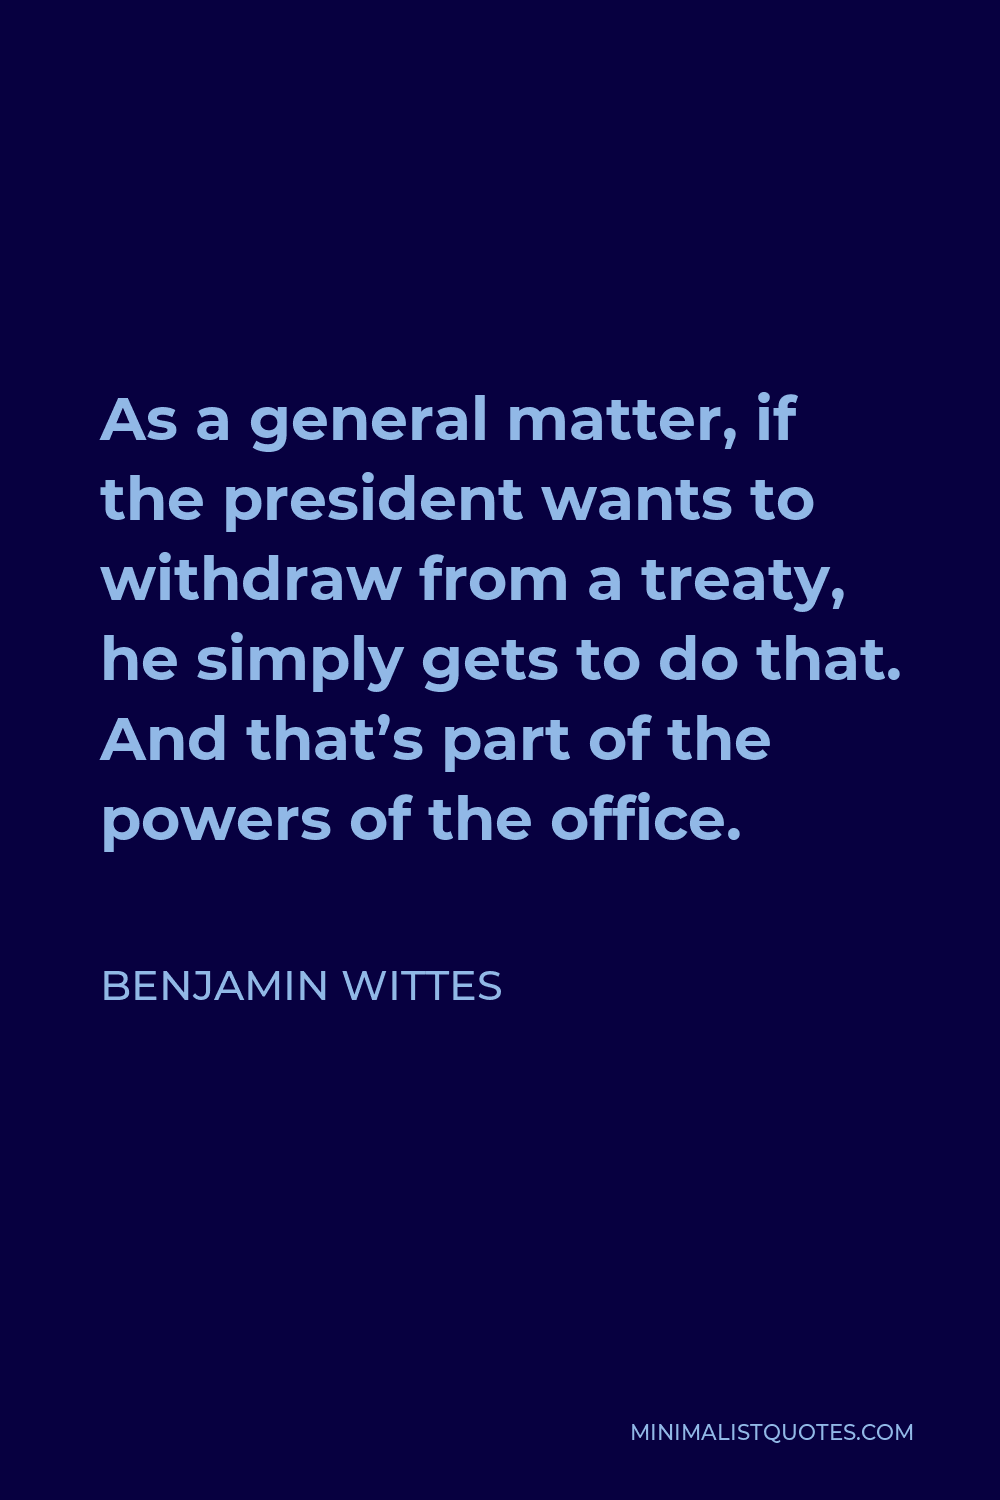 Benjamin Wittes Quote - As a general matter, if the president wants to withdraw from a treaty, he simply gets to do that. And that’s part of the powers of the office.